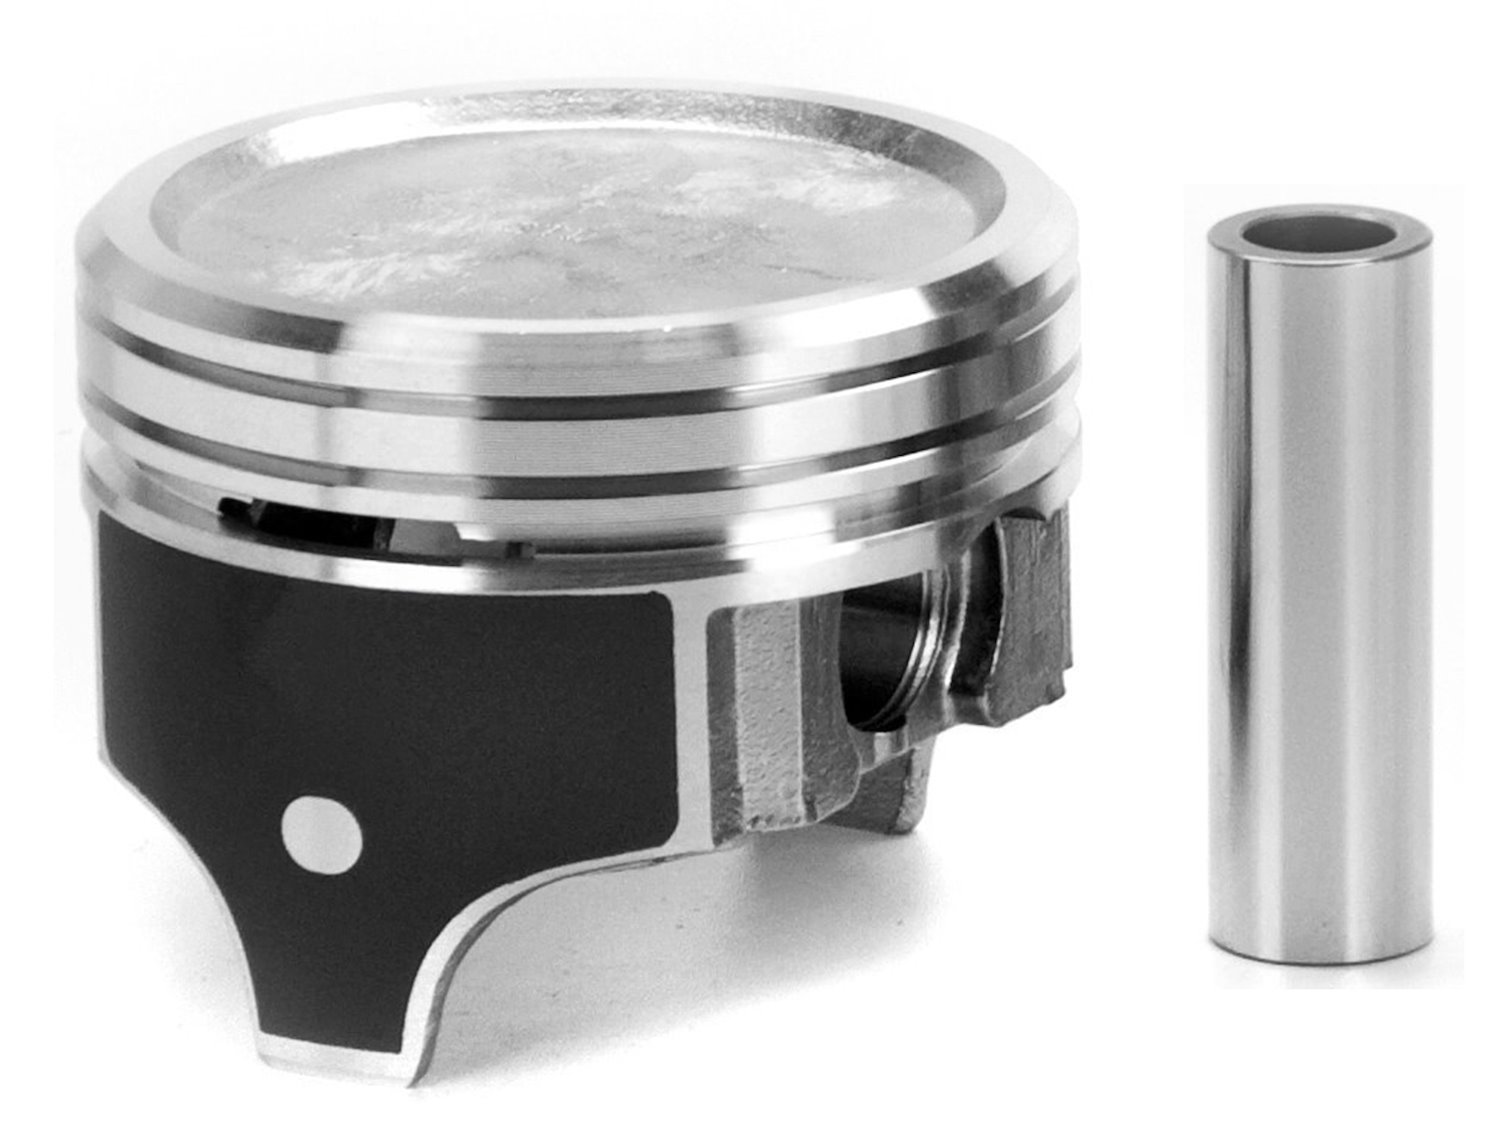 Silv-O-Lite Hypereutectic Dish Piston Set w/Coated Skirts for 1970-1980 Small Block Chevy 400 ci.